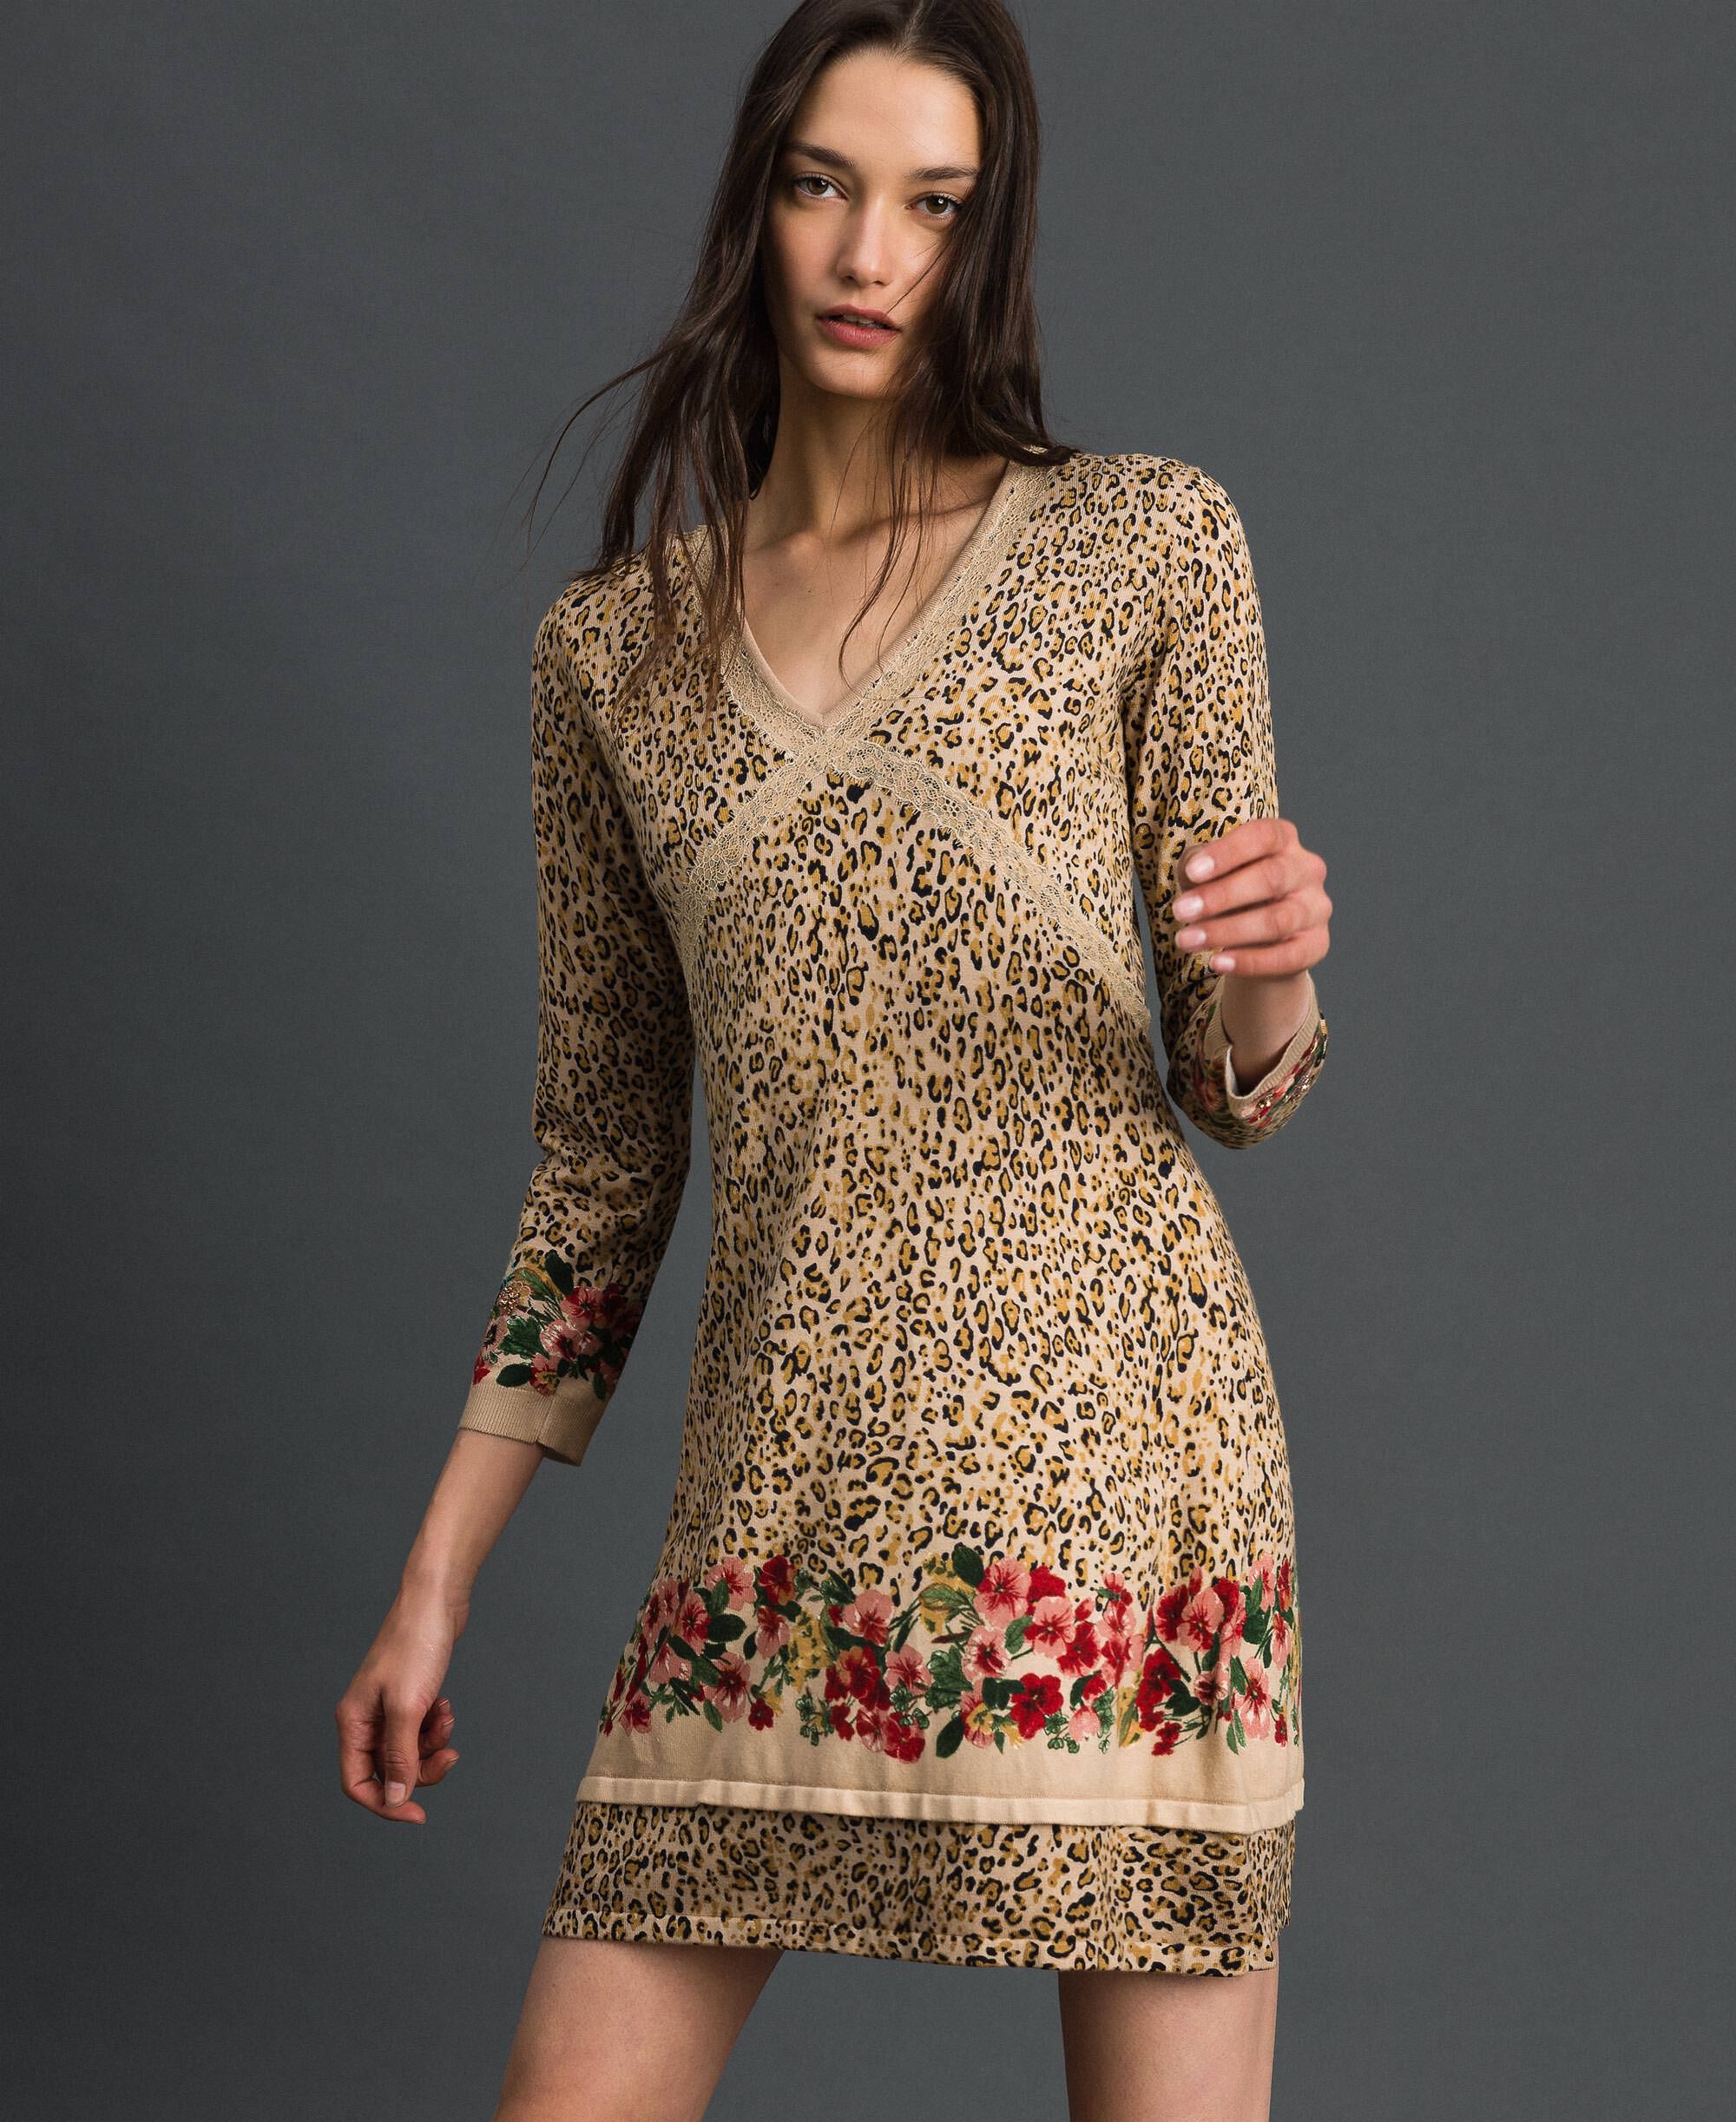 Knit dress with animal and floral print